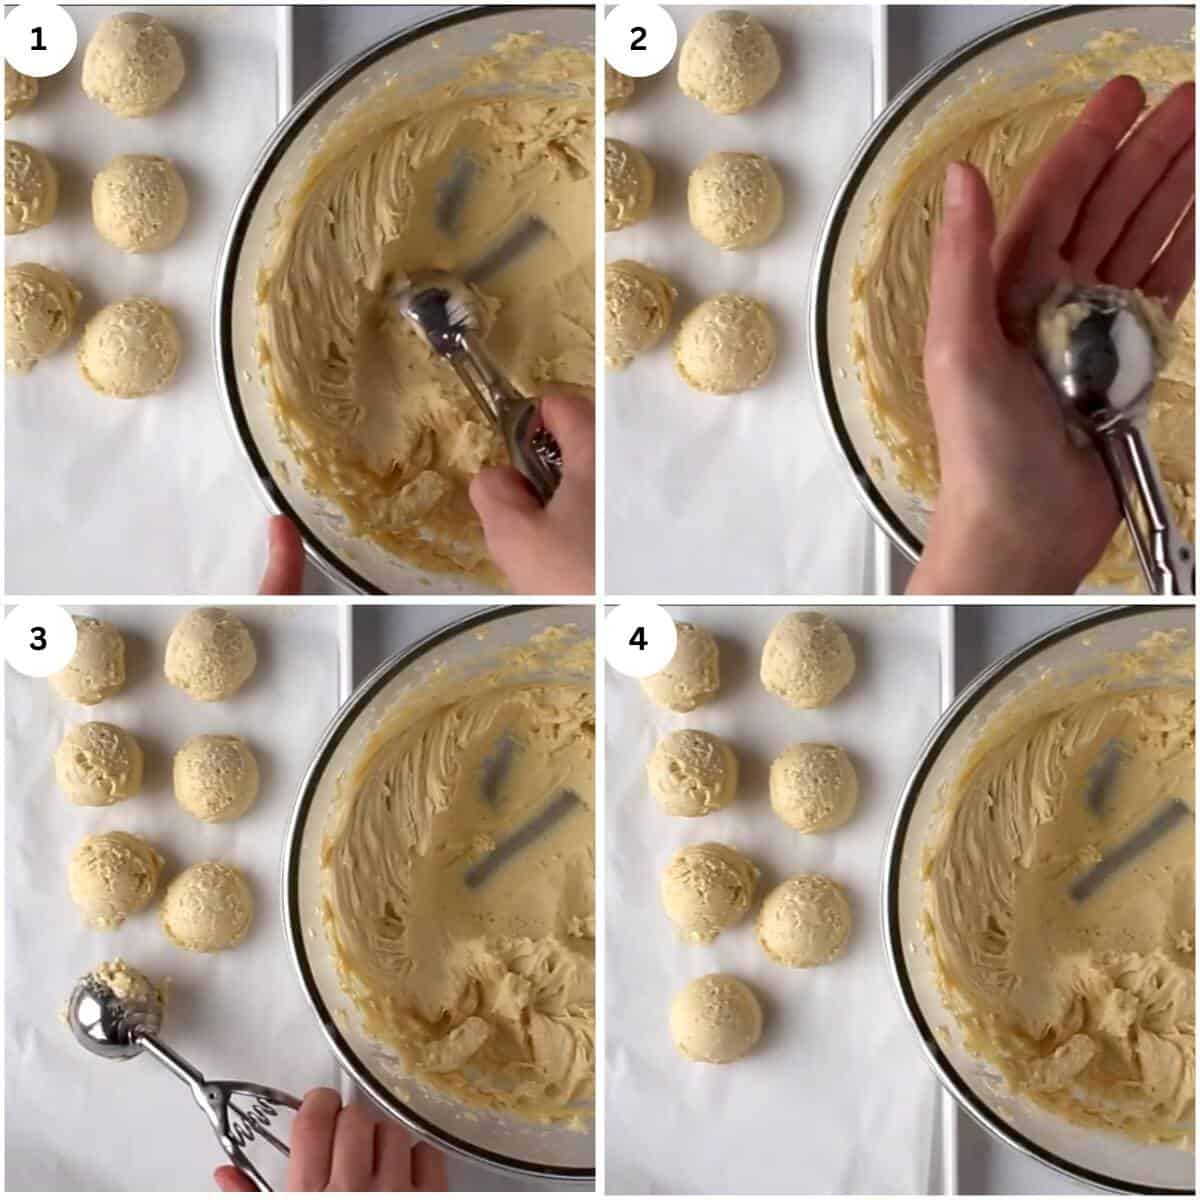 spooning balls of the mixture with an ice cream scoop